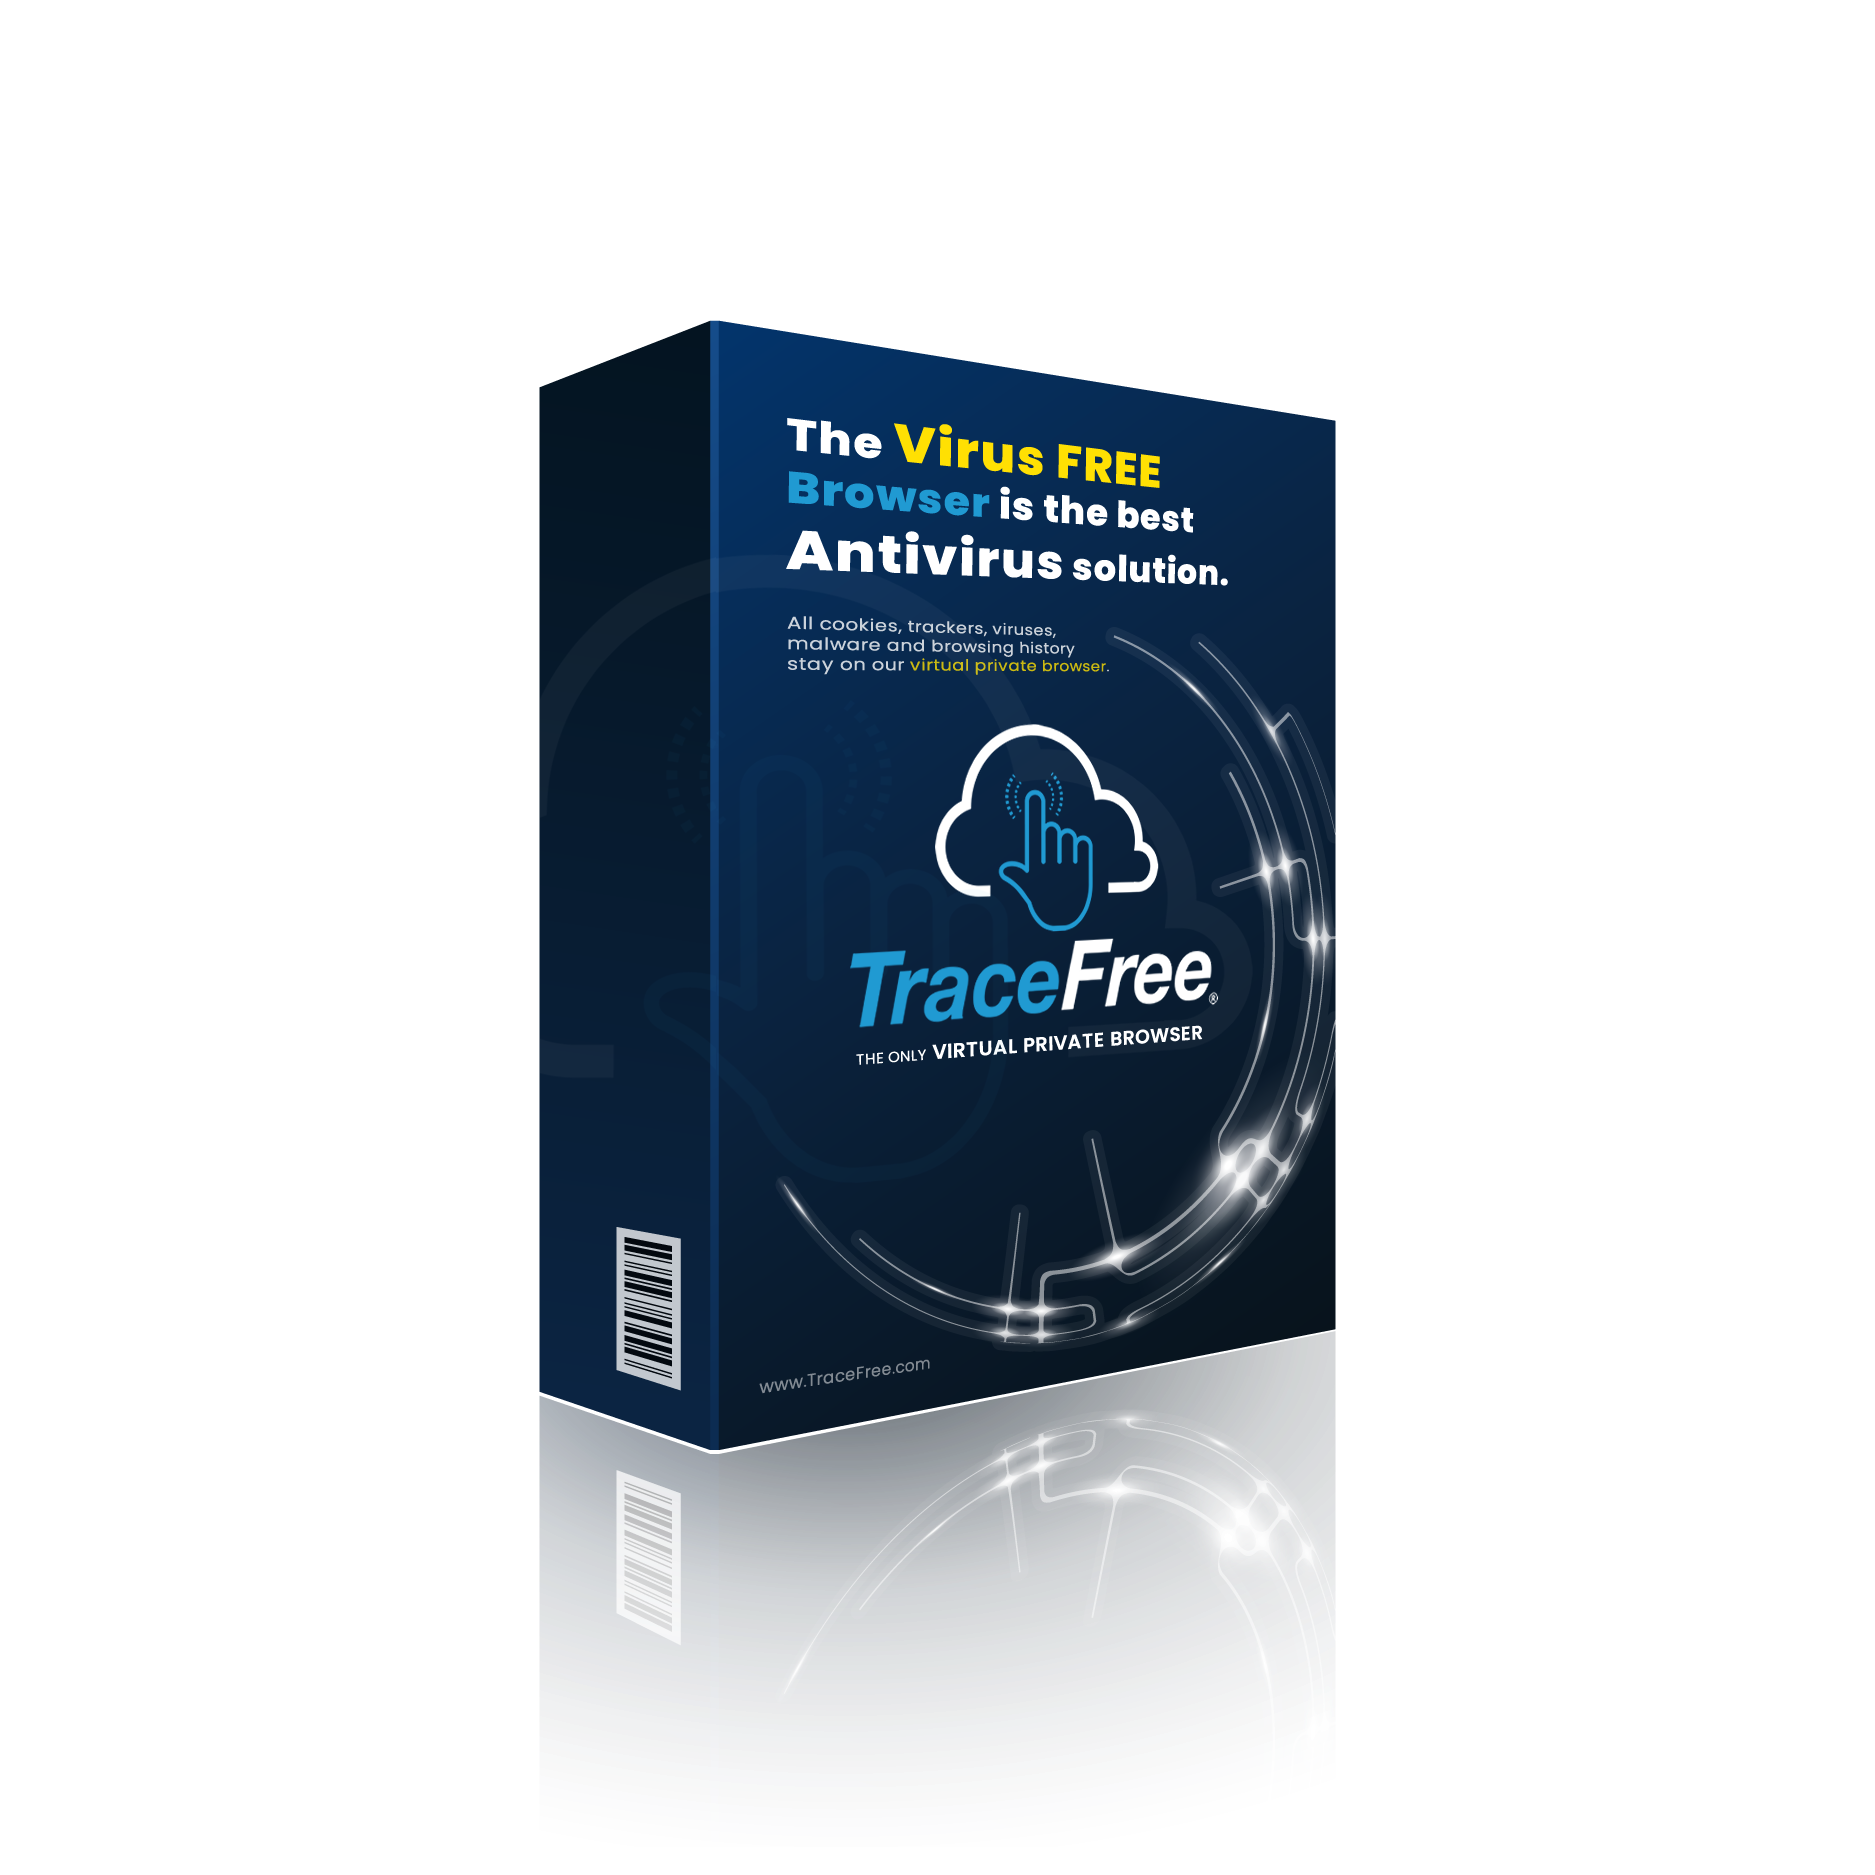 trace-free-best-best-rated-antivirus-solution-2019-2020-five-stars